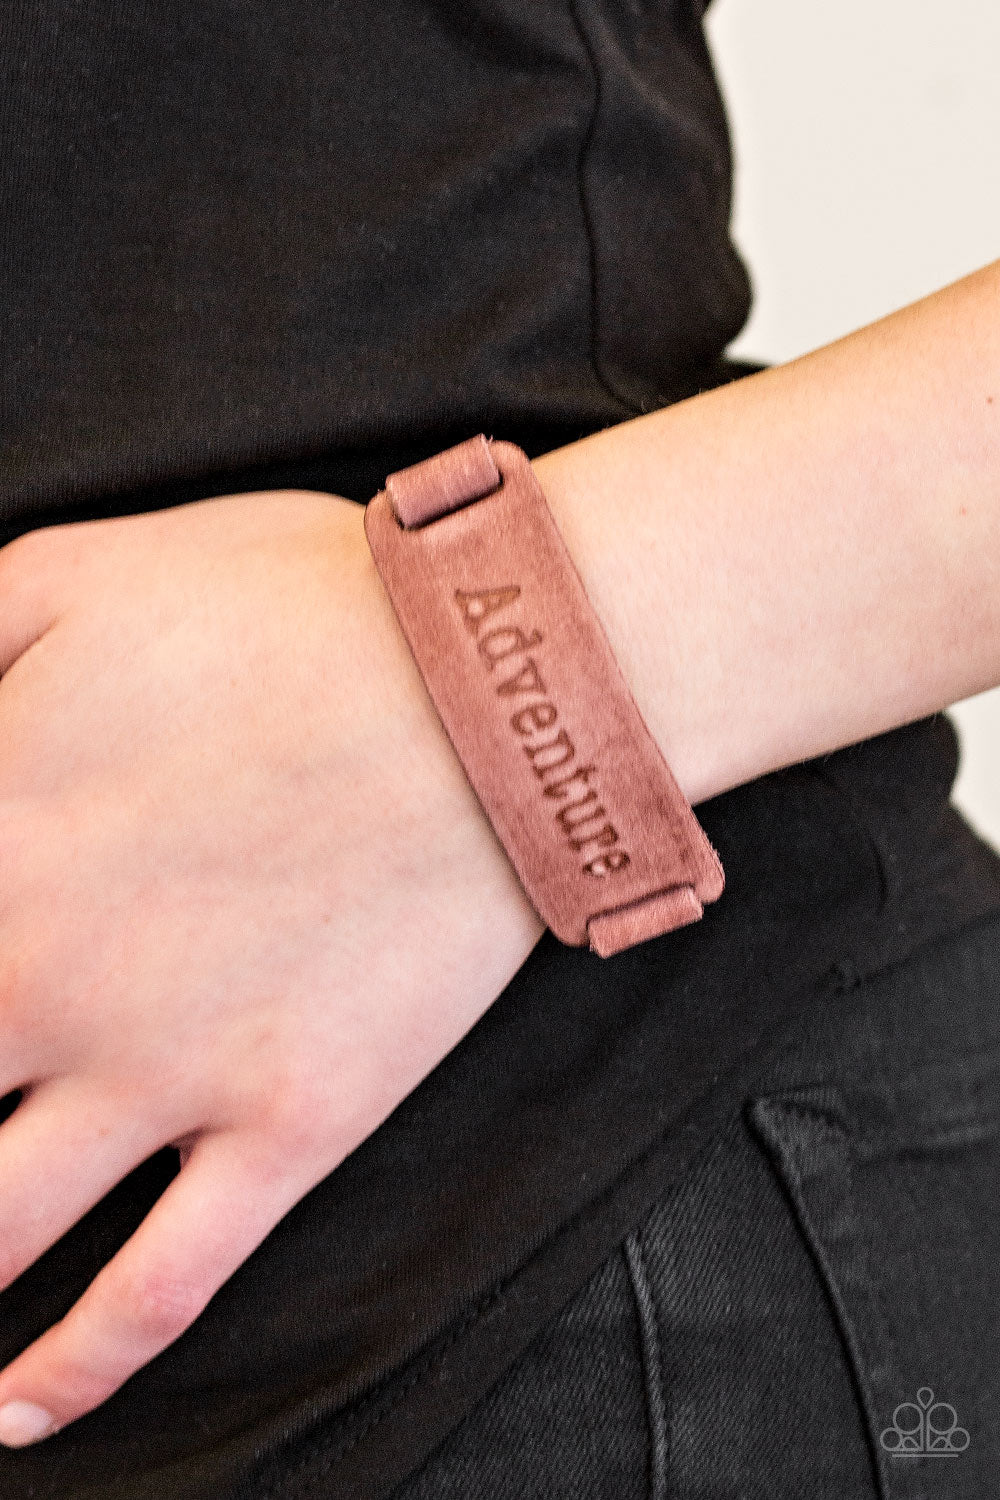 TAKE THE SCENIC ROUTE - BROWN LEATHER ADVENTURE OUTDOORS LOVER INSPIRATIONAL BRACELET